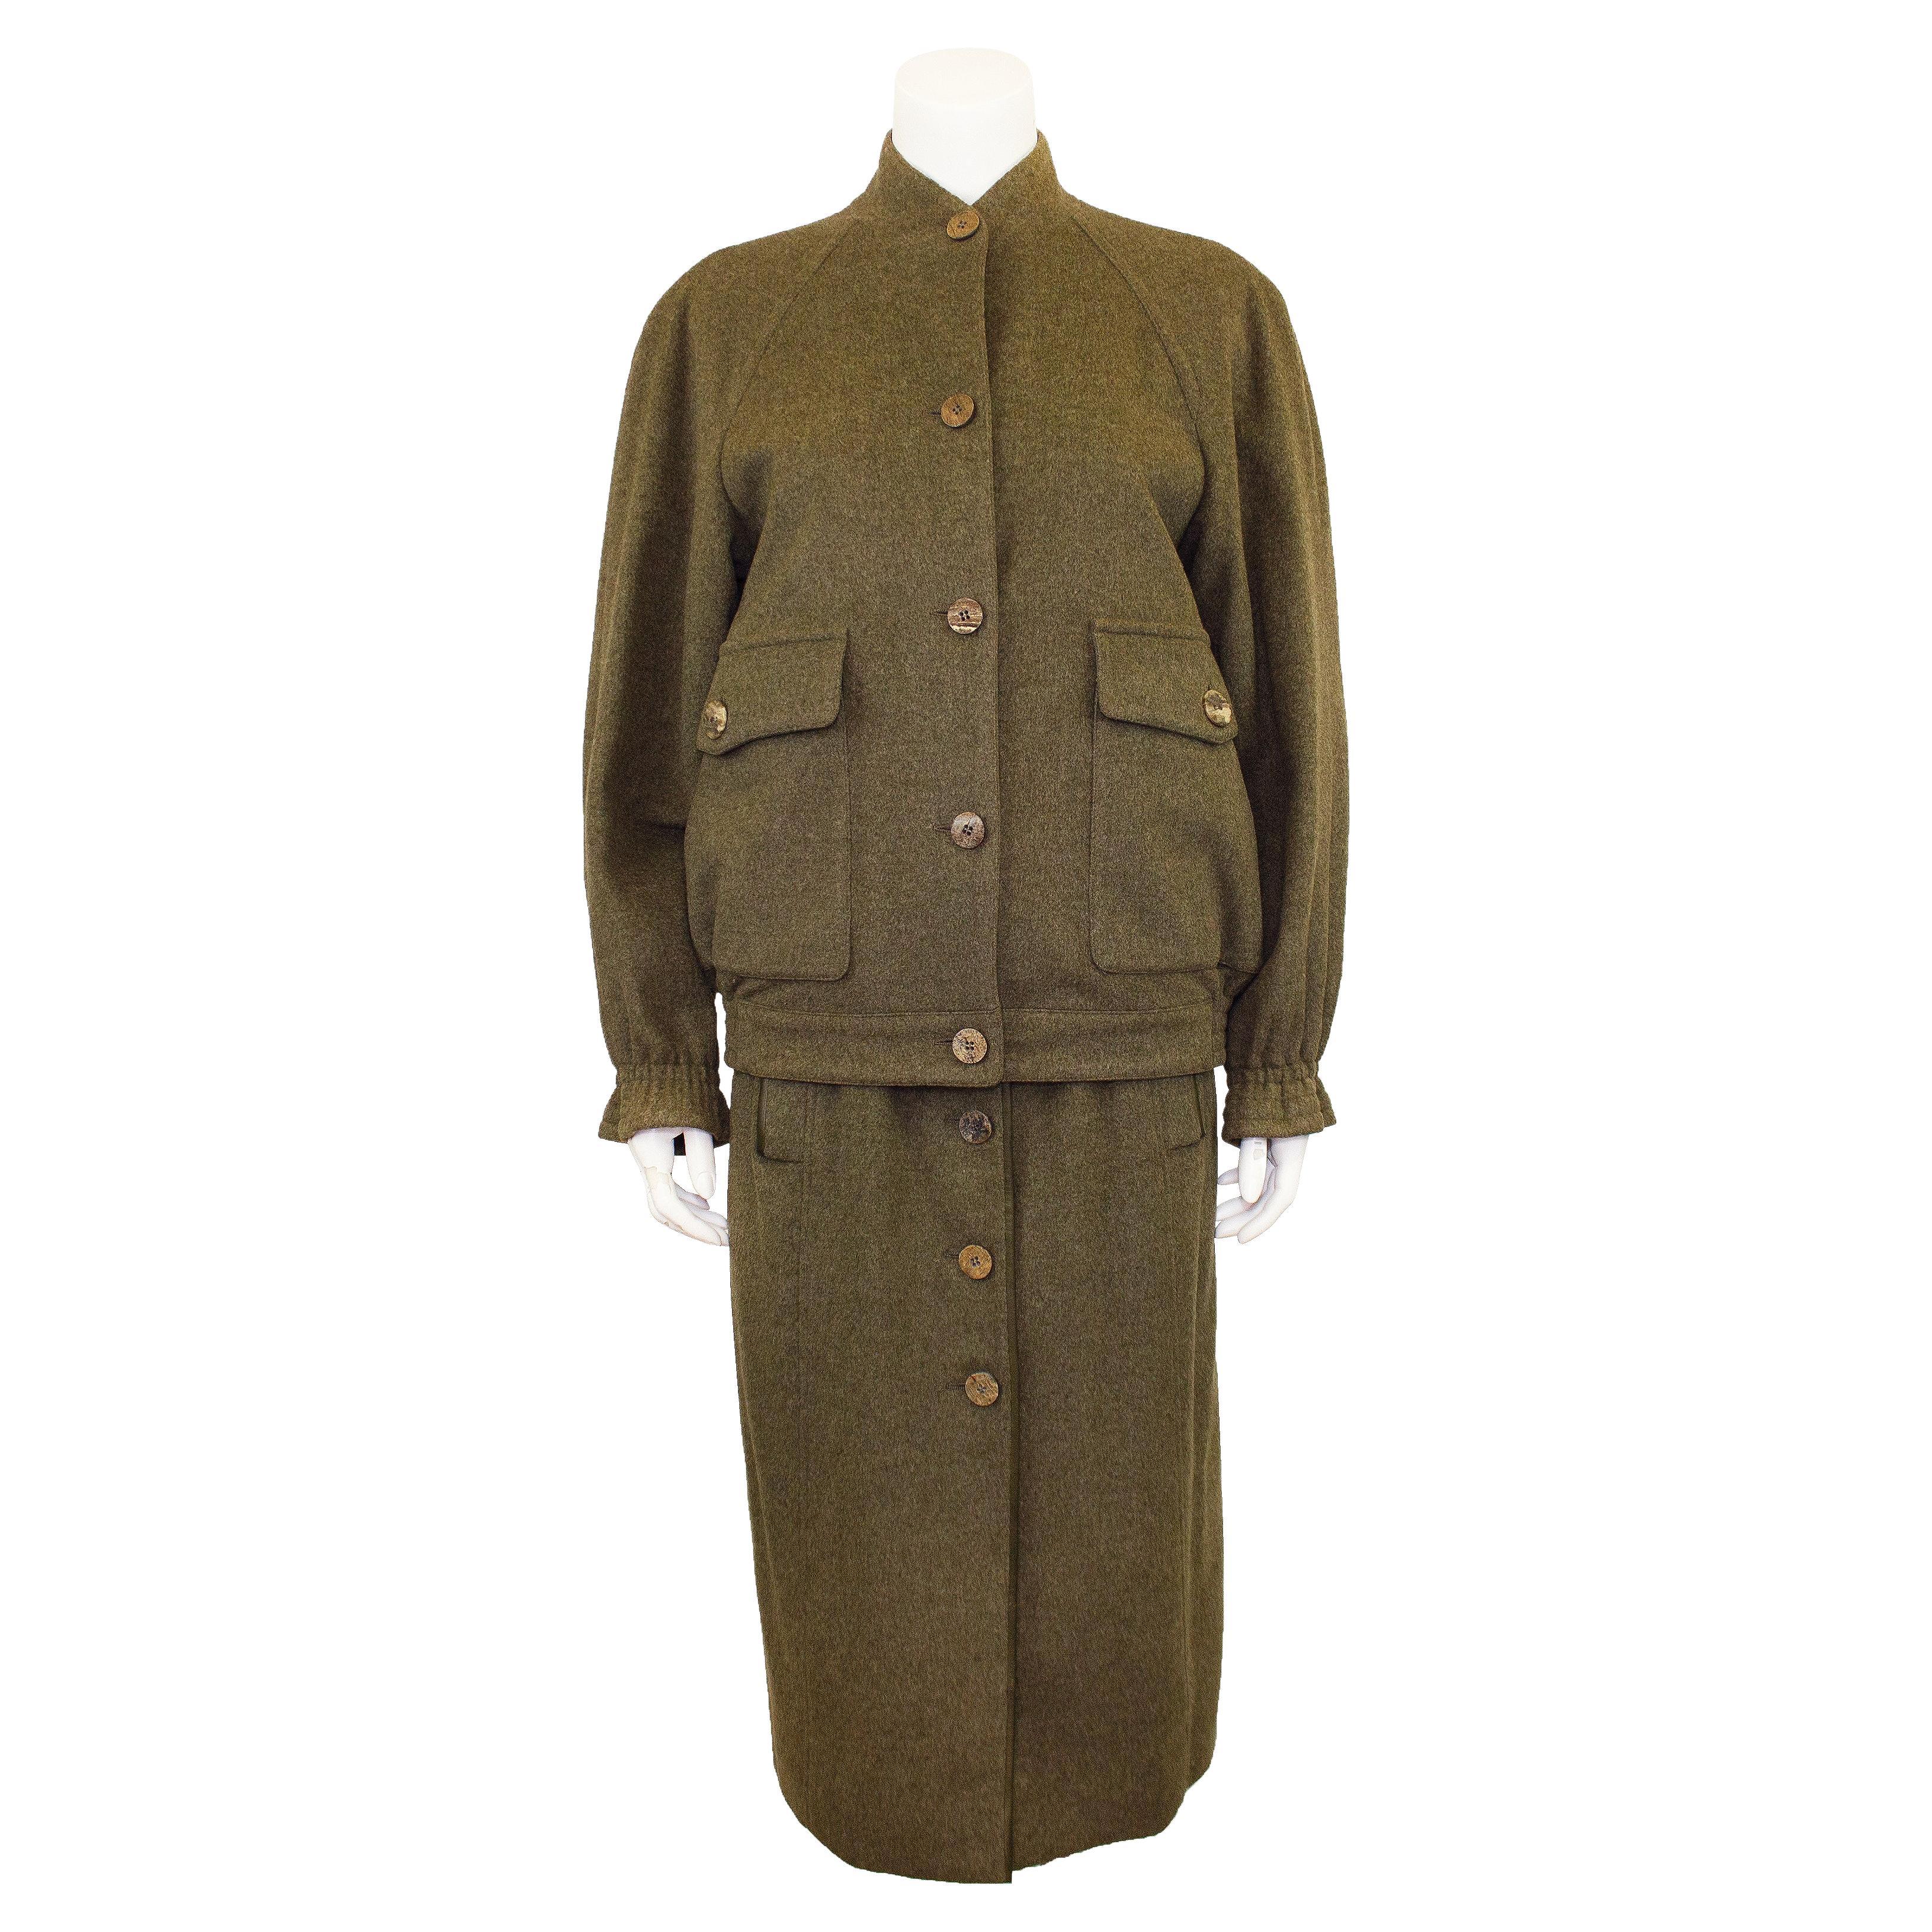 1980s Hermes Olive Green Wool and Cashmere Jacket and Skirt Ensemble  For Sale